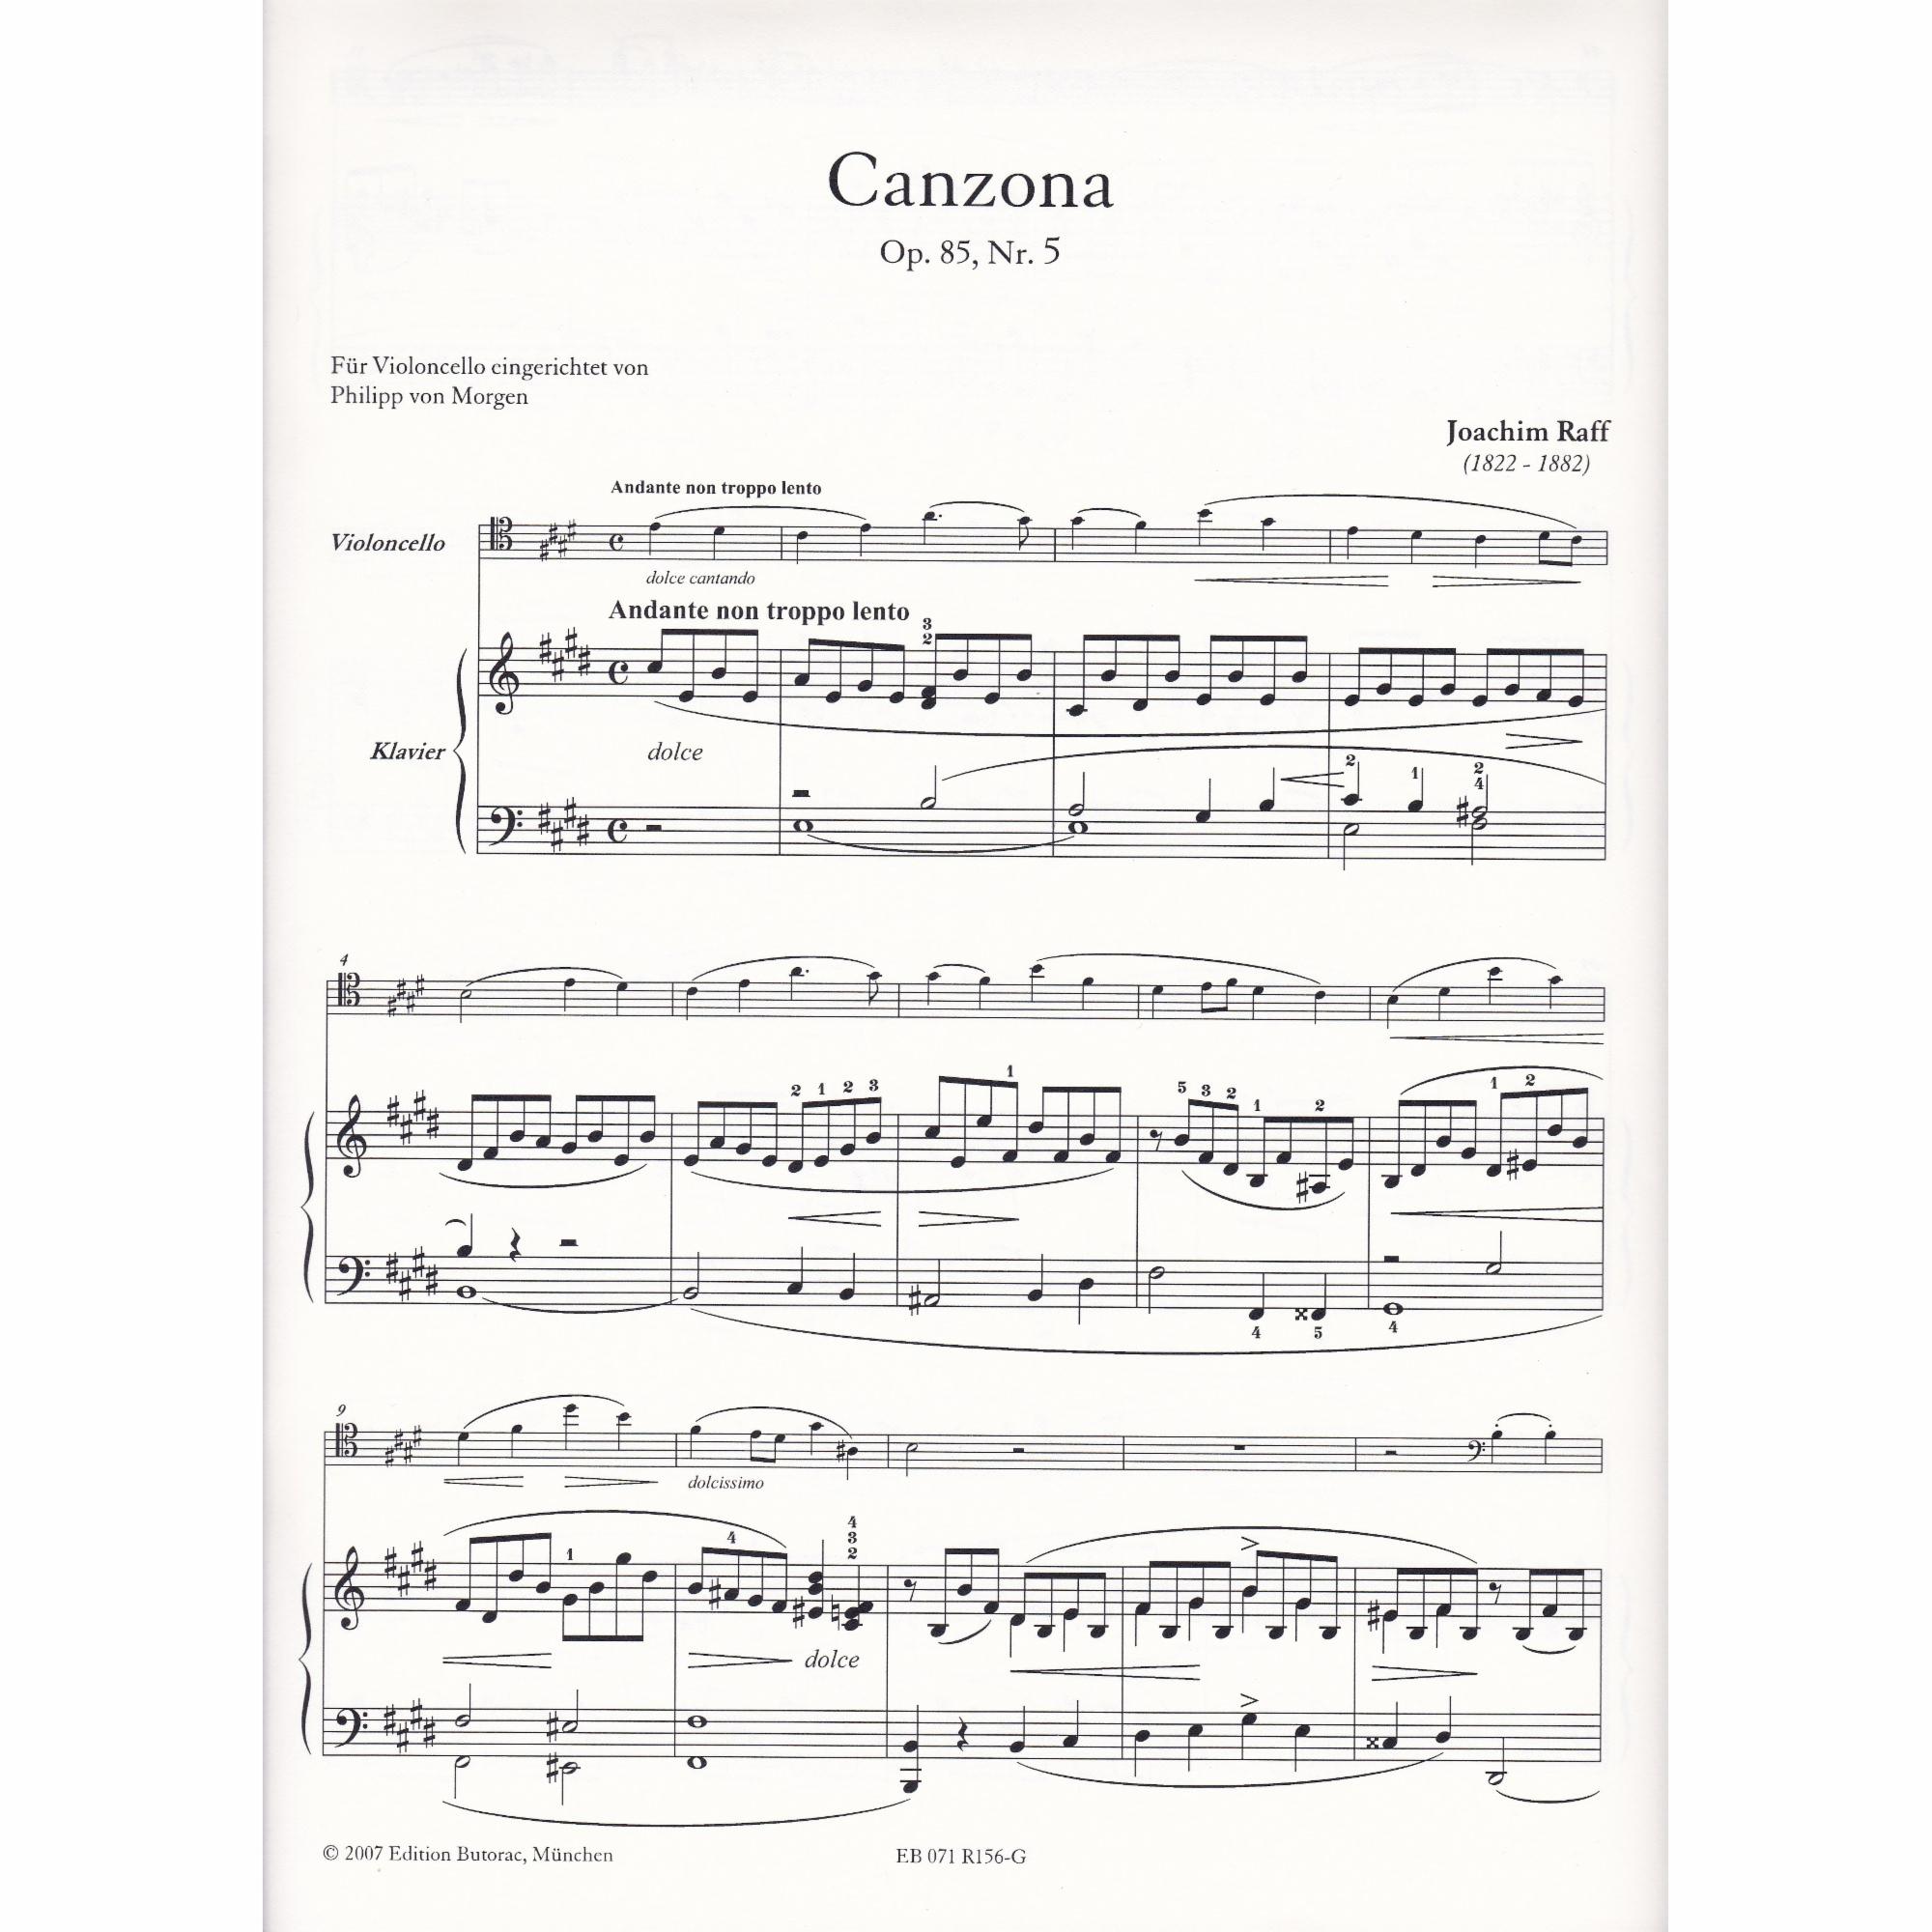 Canzona for Cello and Piano, Op. 85, No. 5